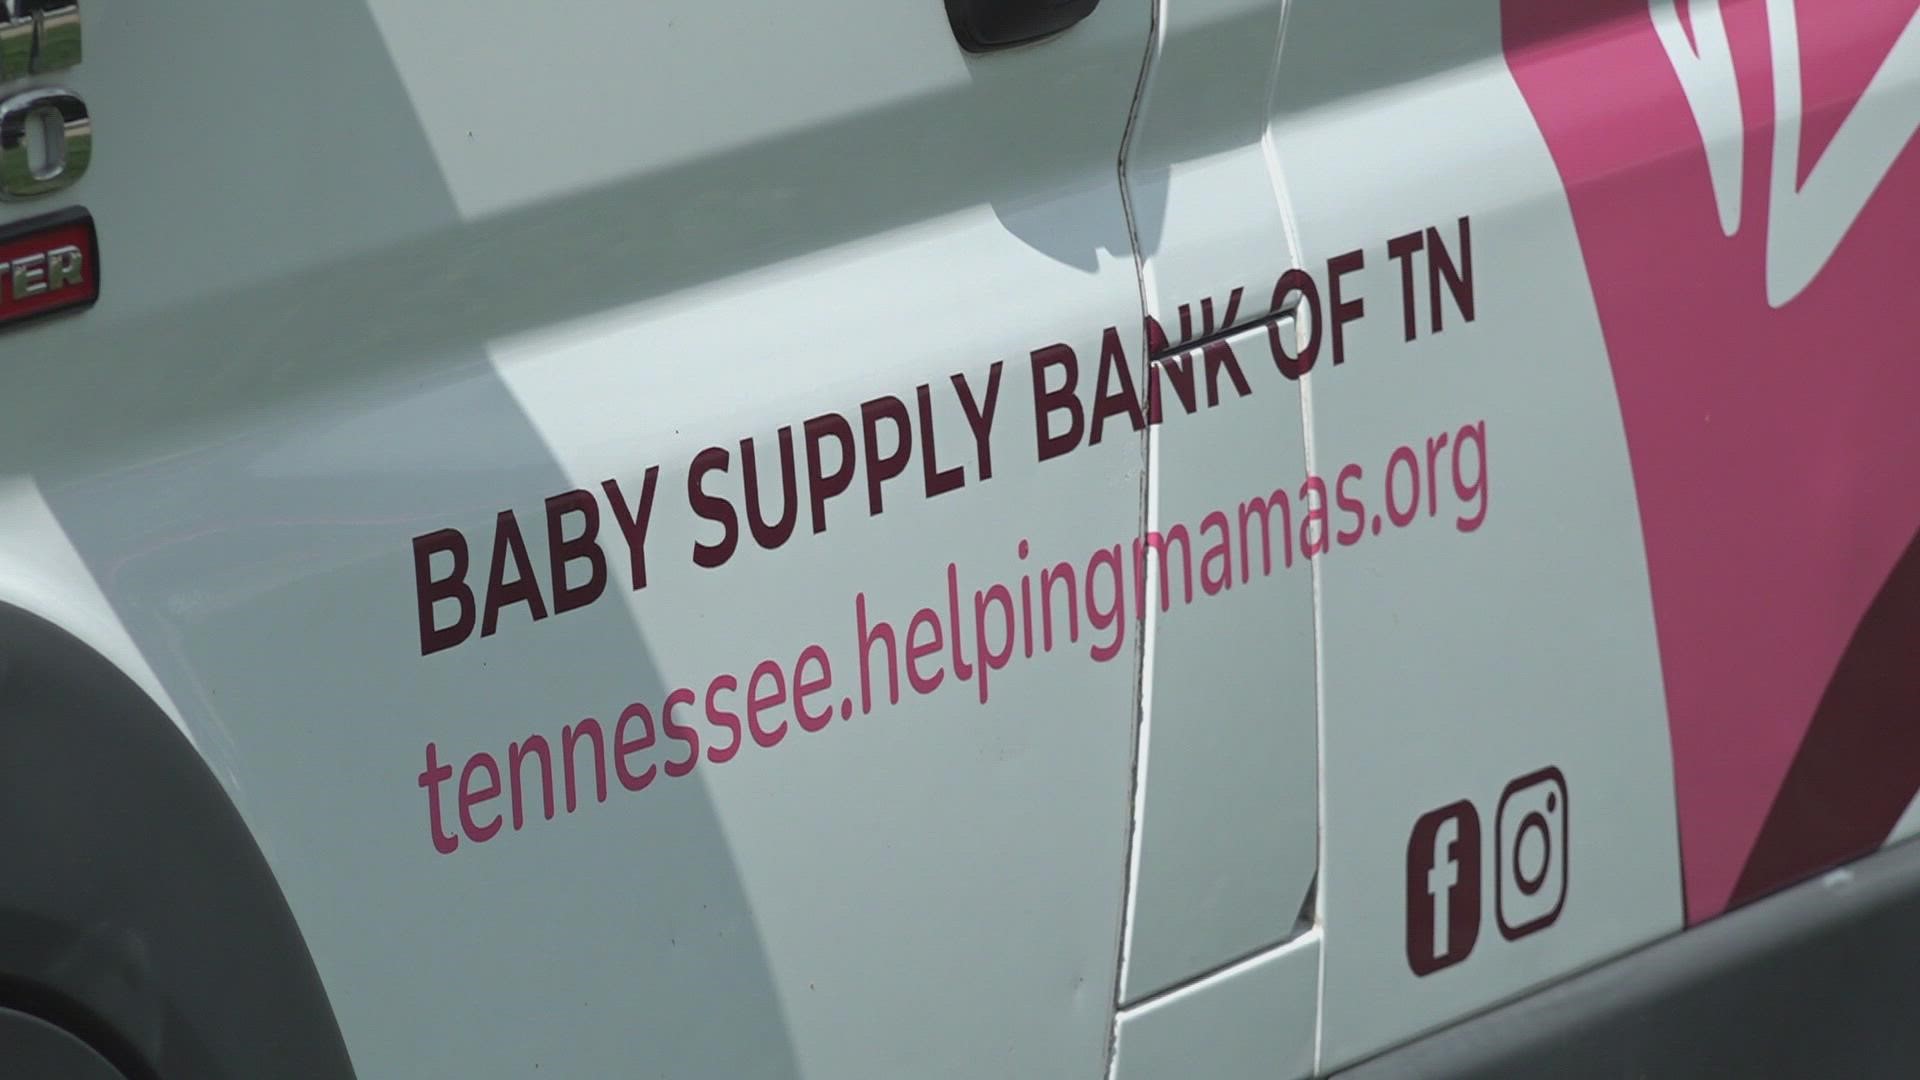 Helping Mama's is a supply bank organization that gives essentials to mothers.